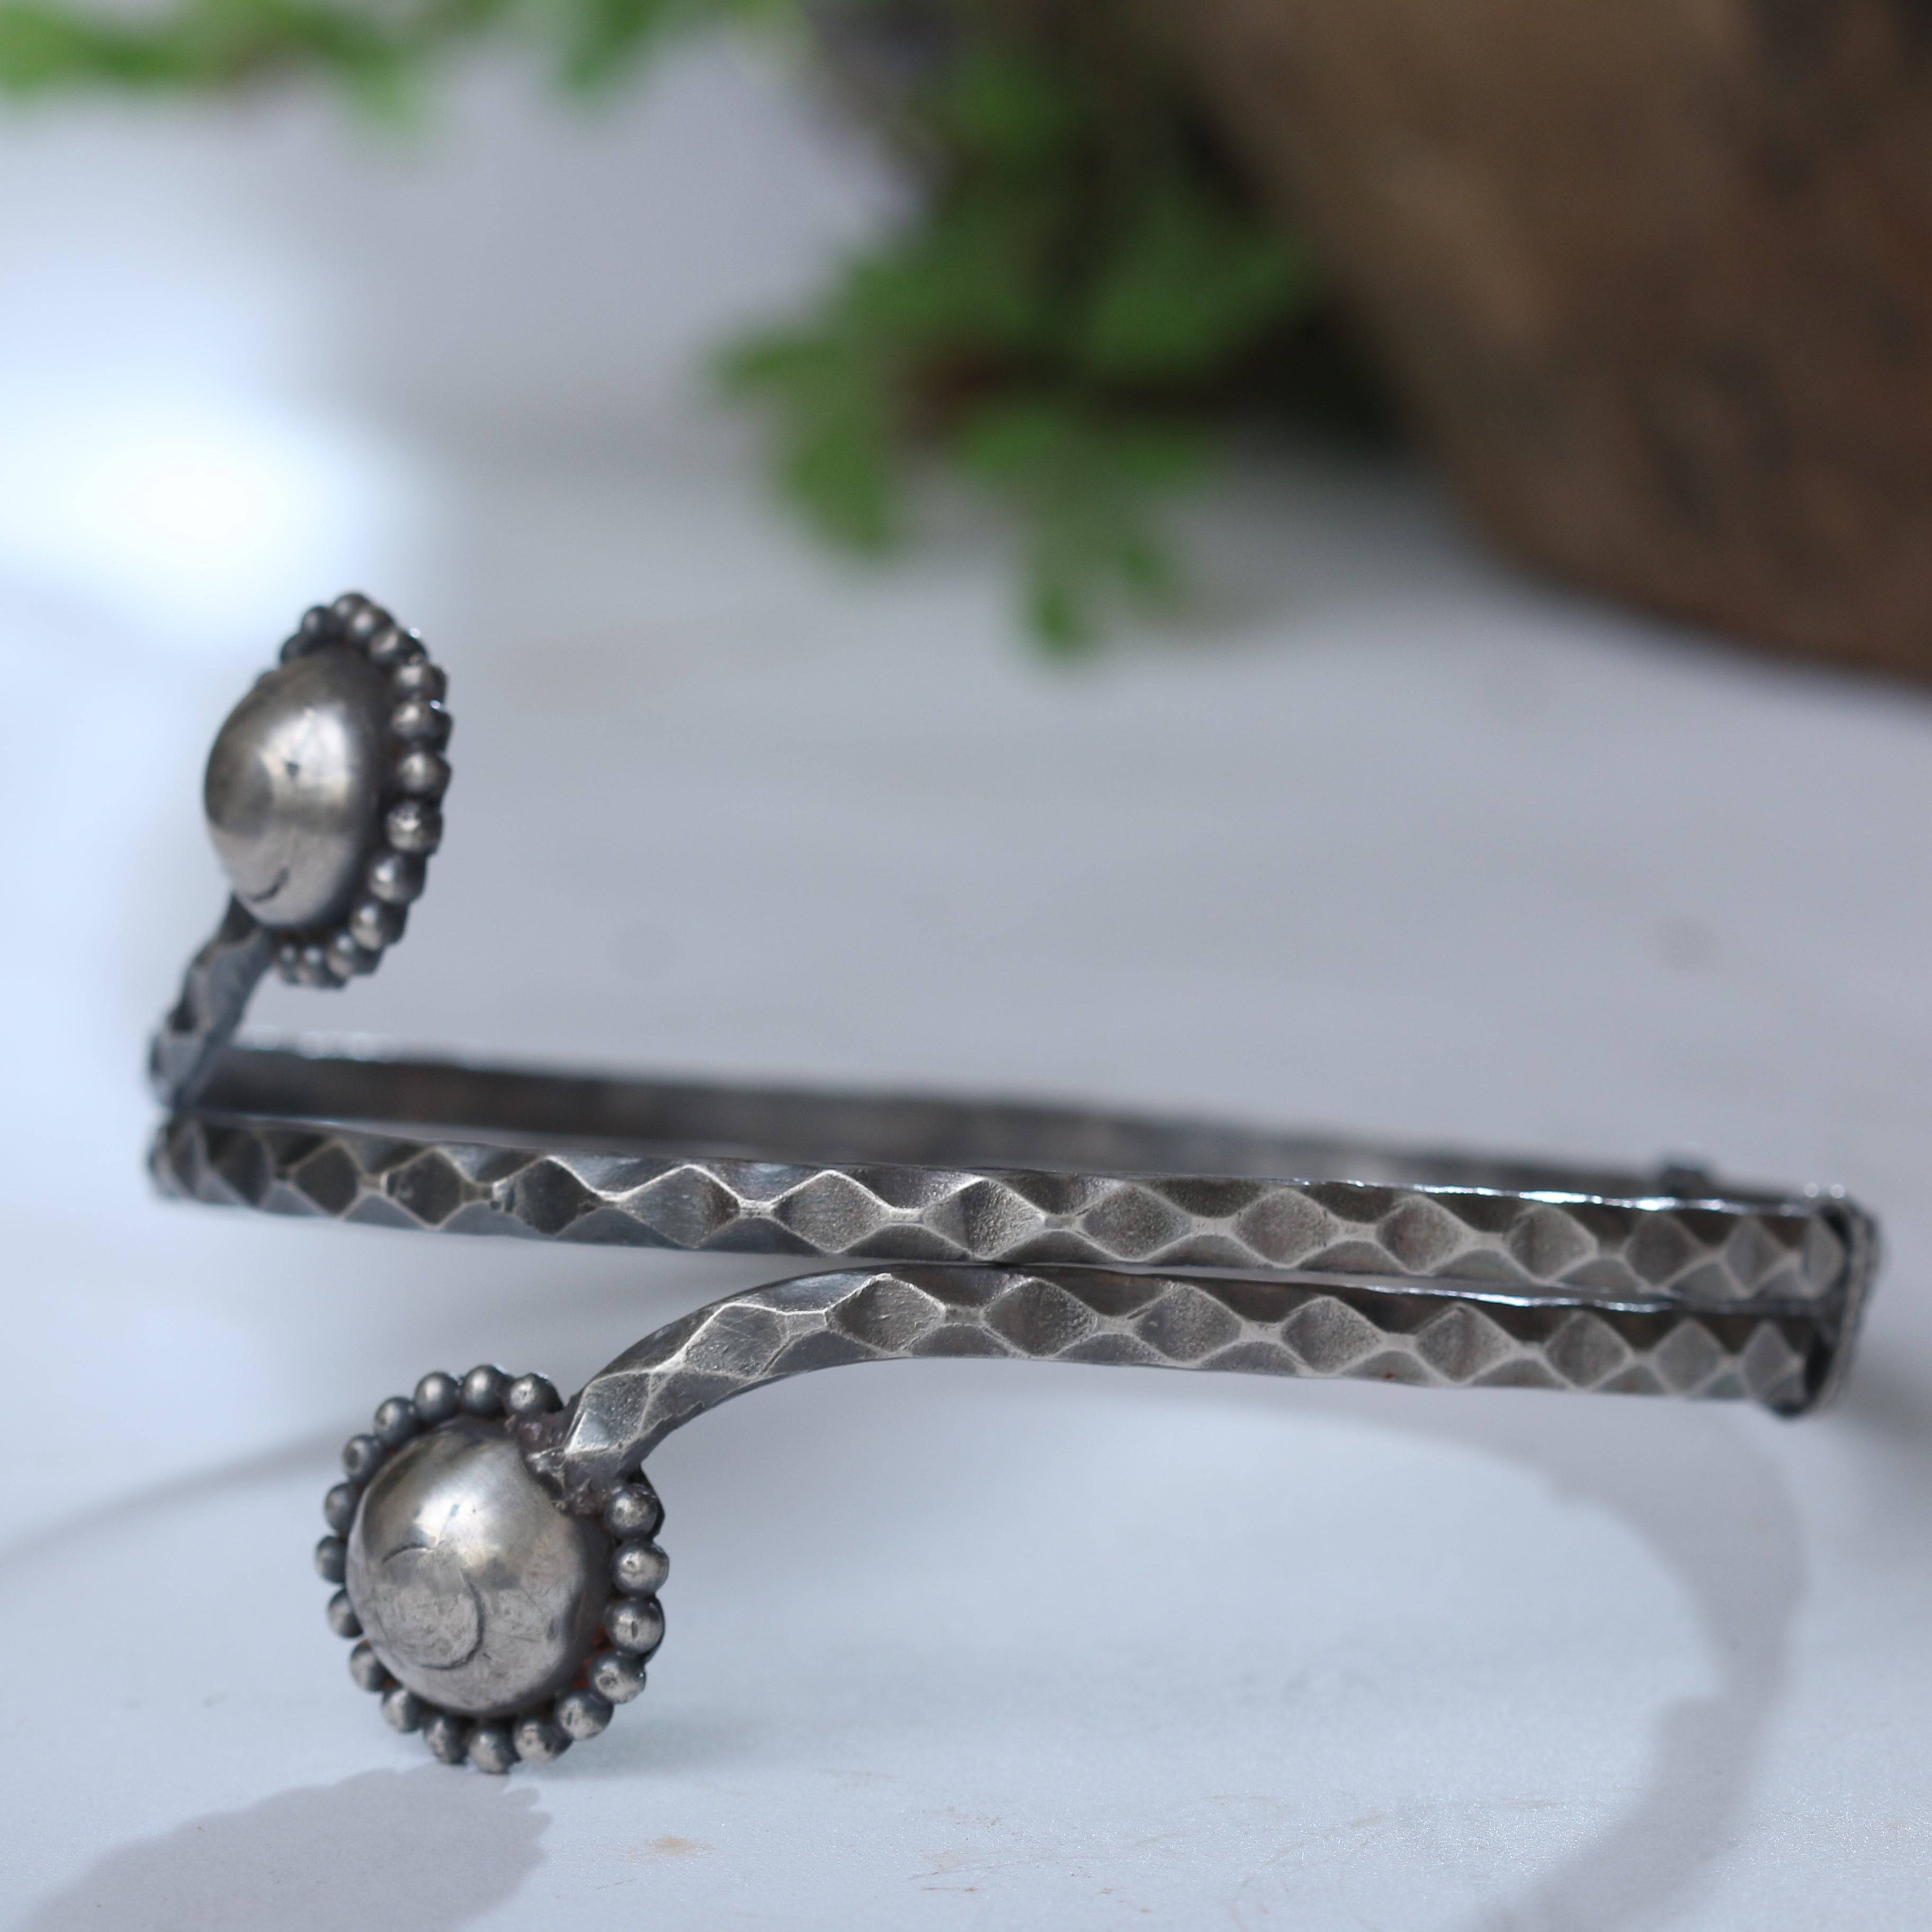 Silver Armband with Dome Motif (Adjustable)